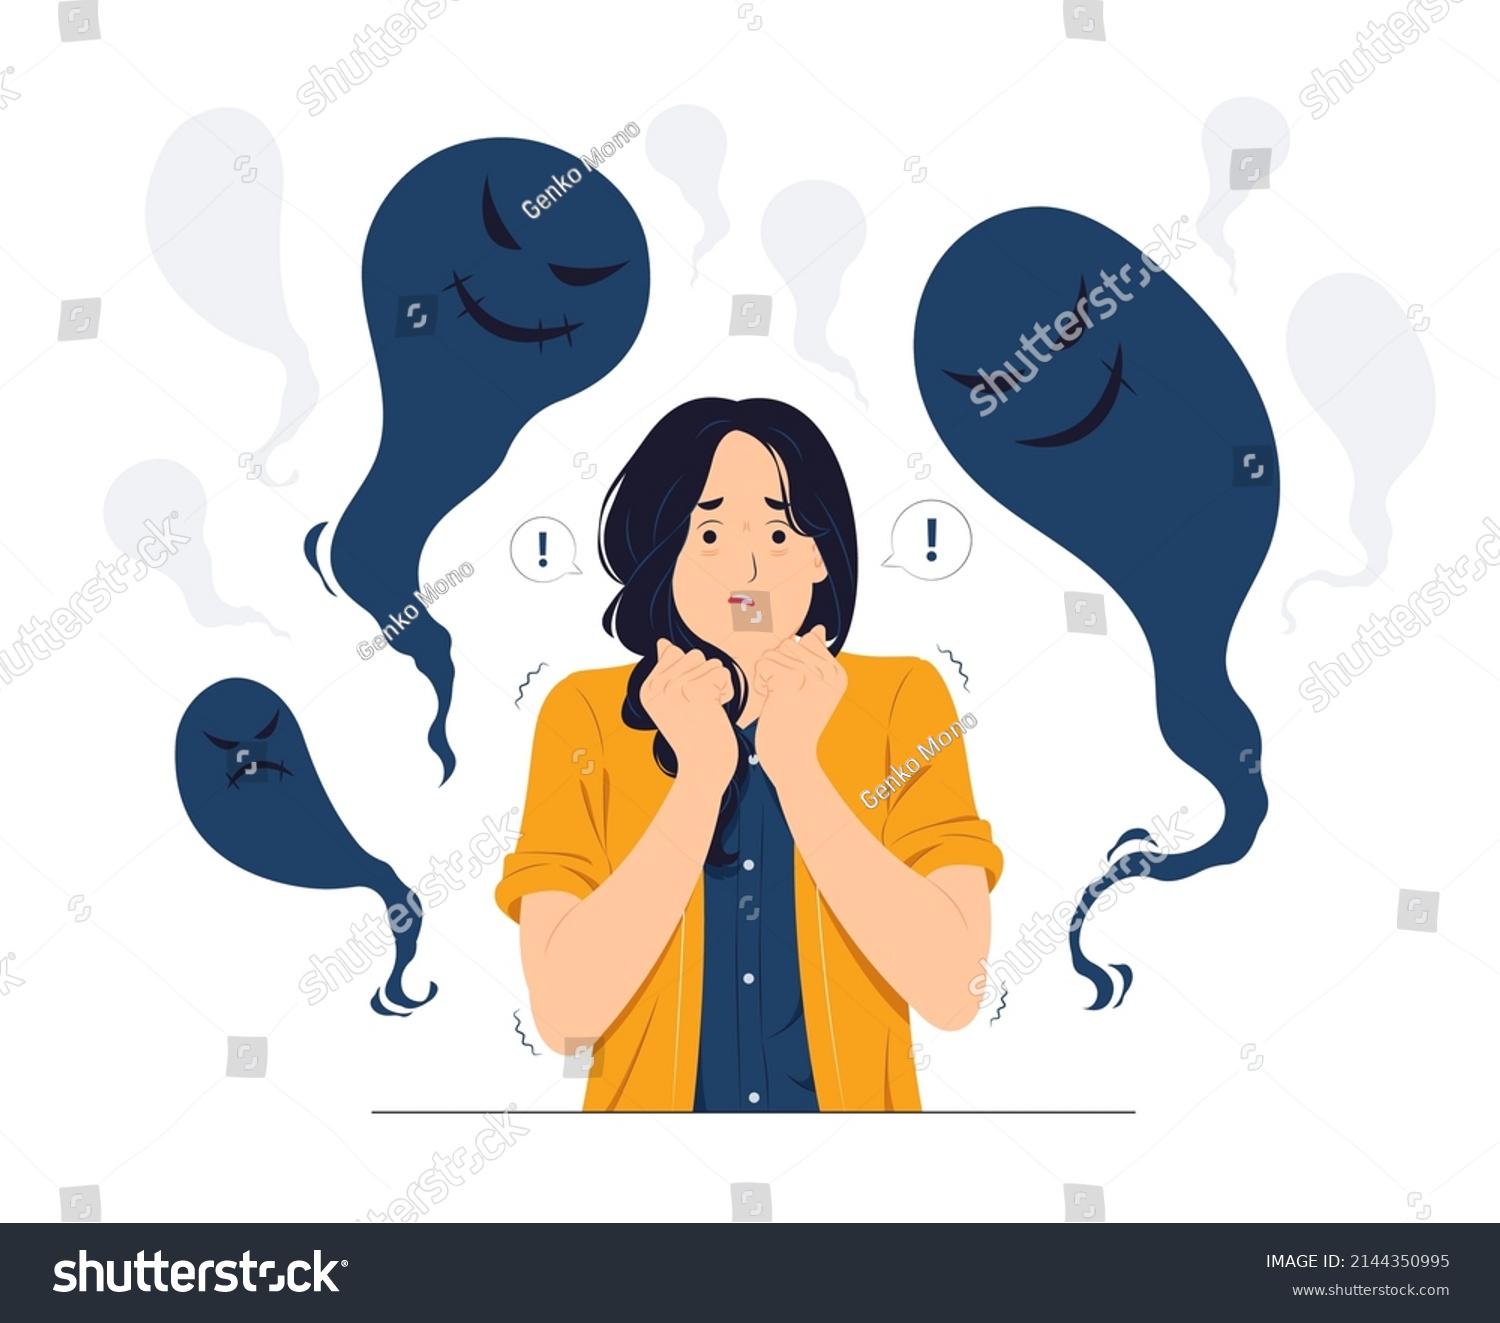 Woman with Schizophrenia, post-traumatic stress mental disorder, shocked, scared, panic, anxiety, frustrated, fear and terrified concept illustration #2144350995